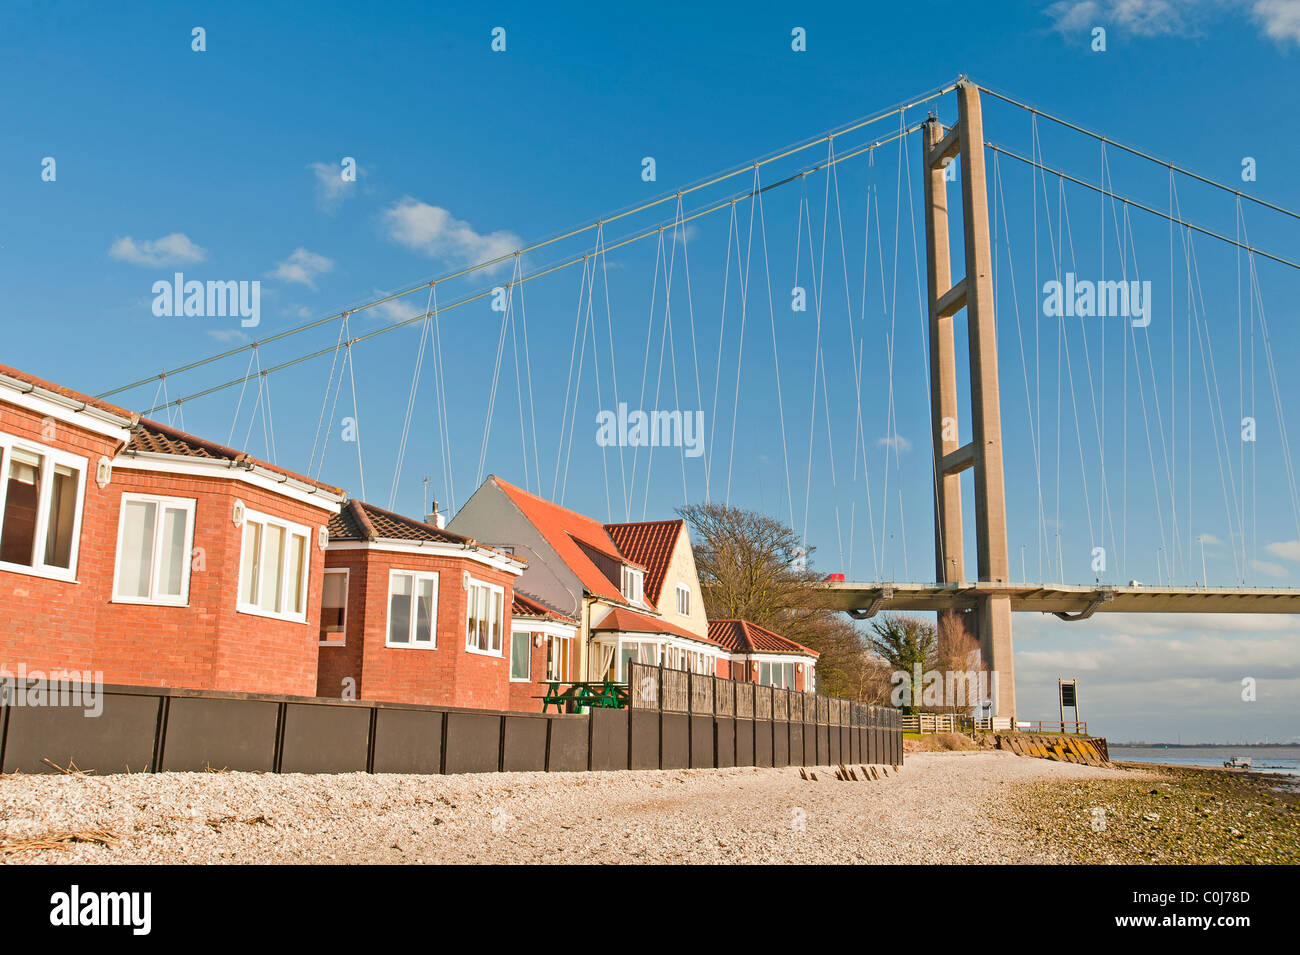 Housing community situated next to a large suspension road bridge over river Stock Photo